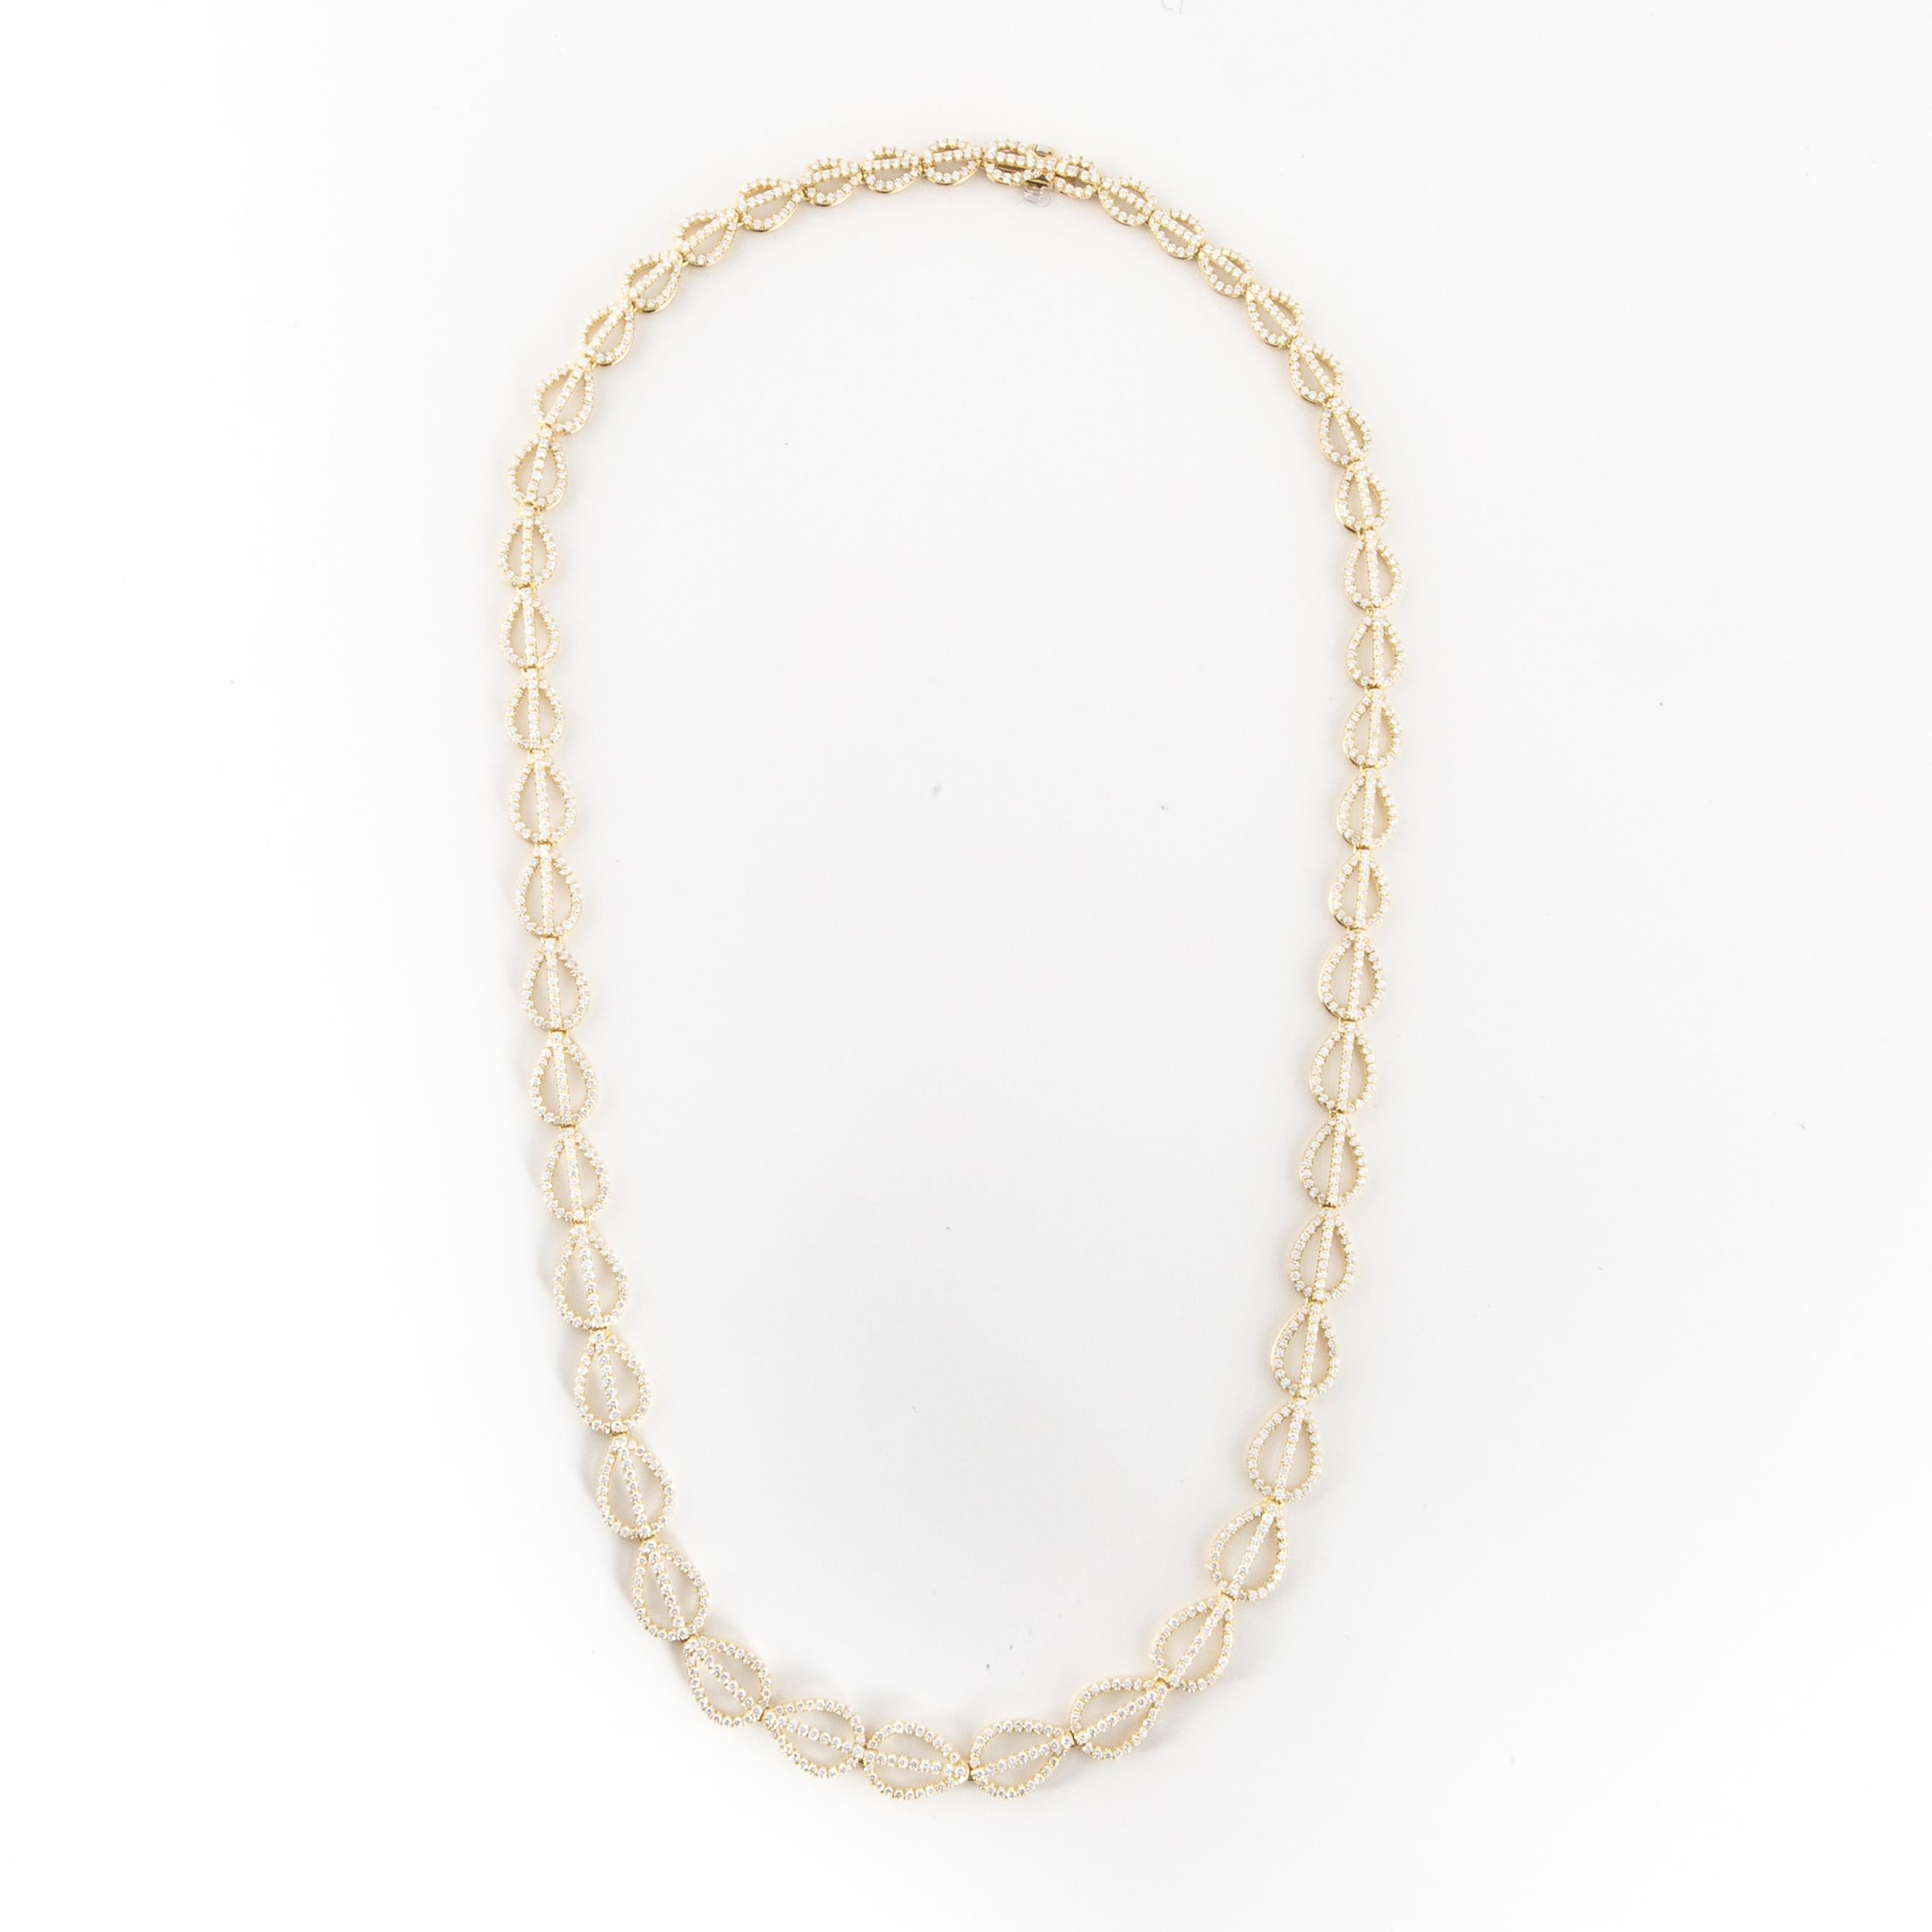 Round Cut Teardrop Link Necklace with Diamonds in 18 Karat Yellow Gold